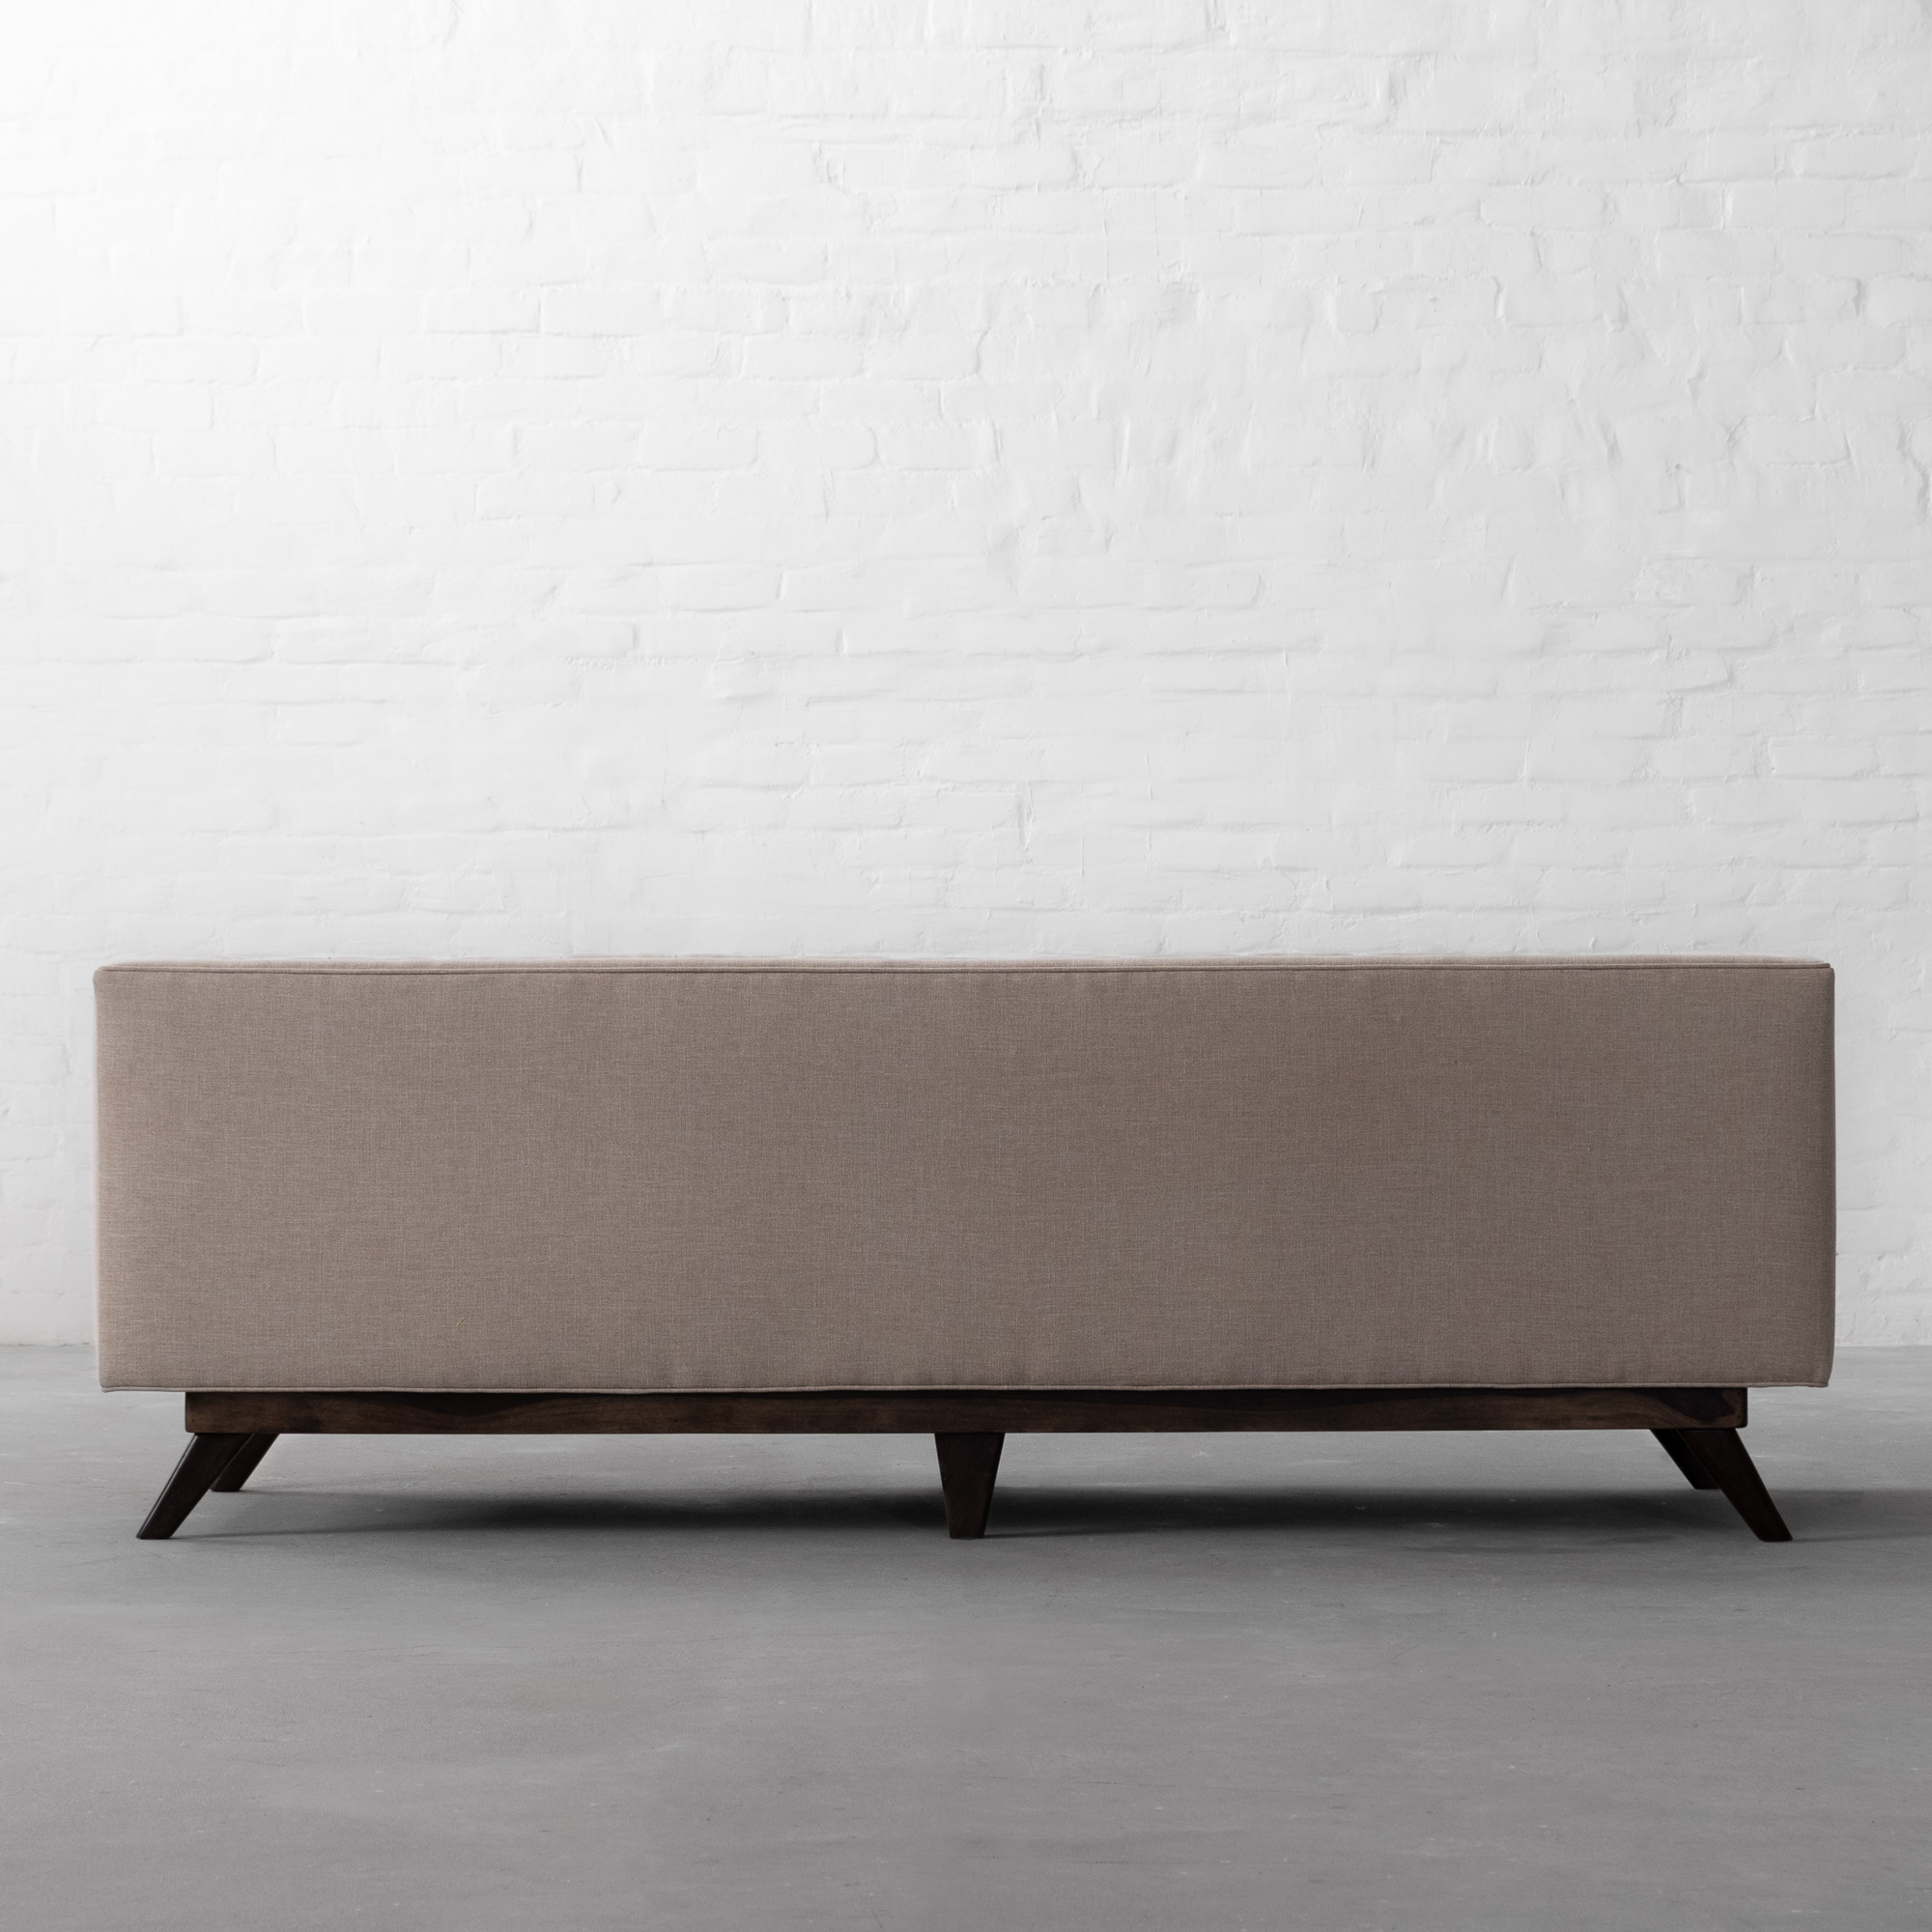 Bombay Tufted Sofa Collection